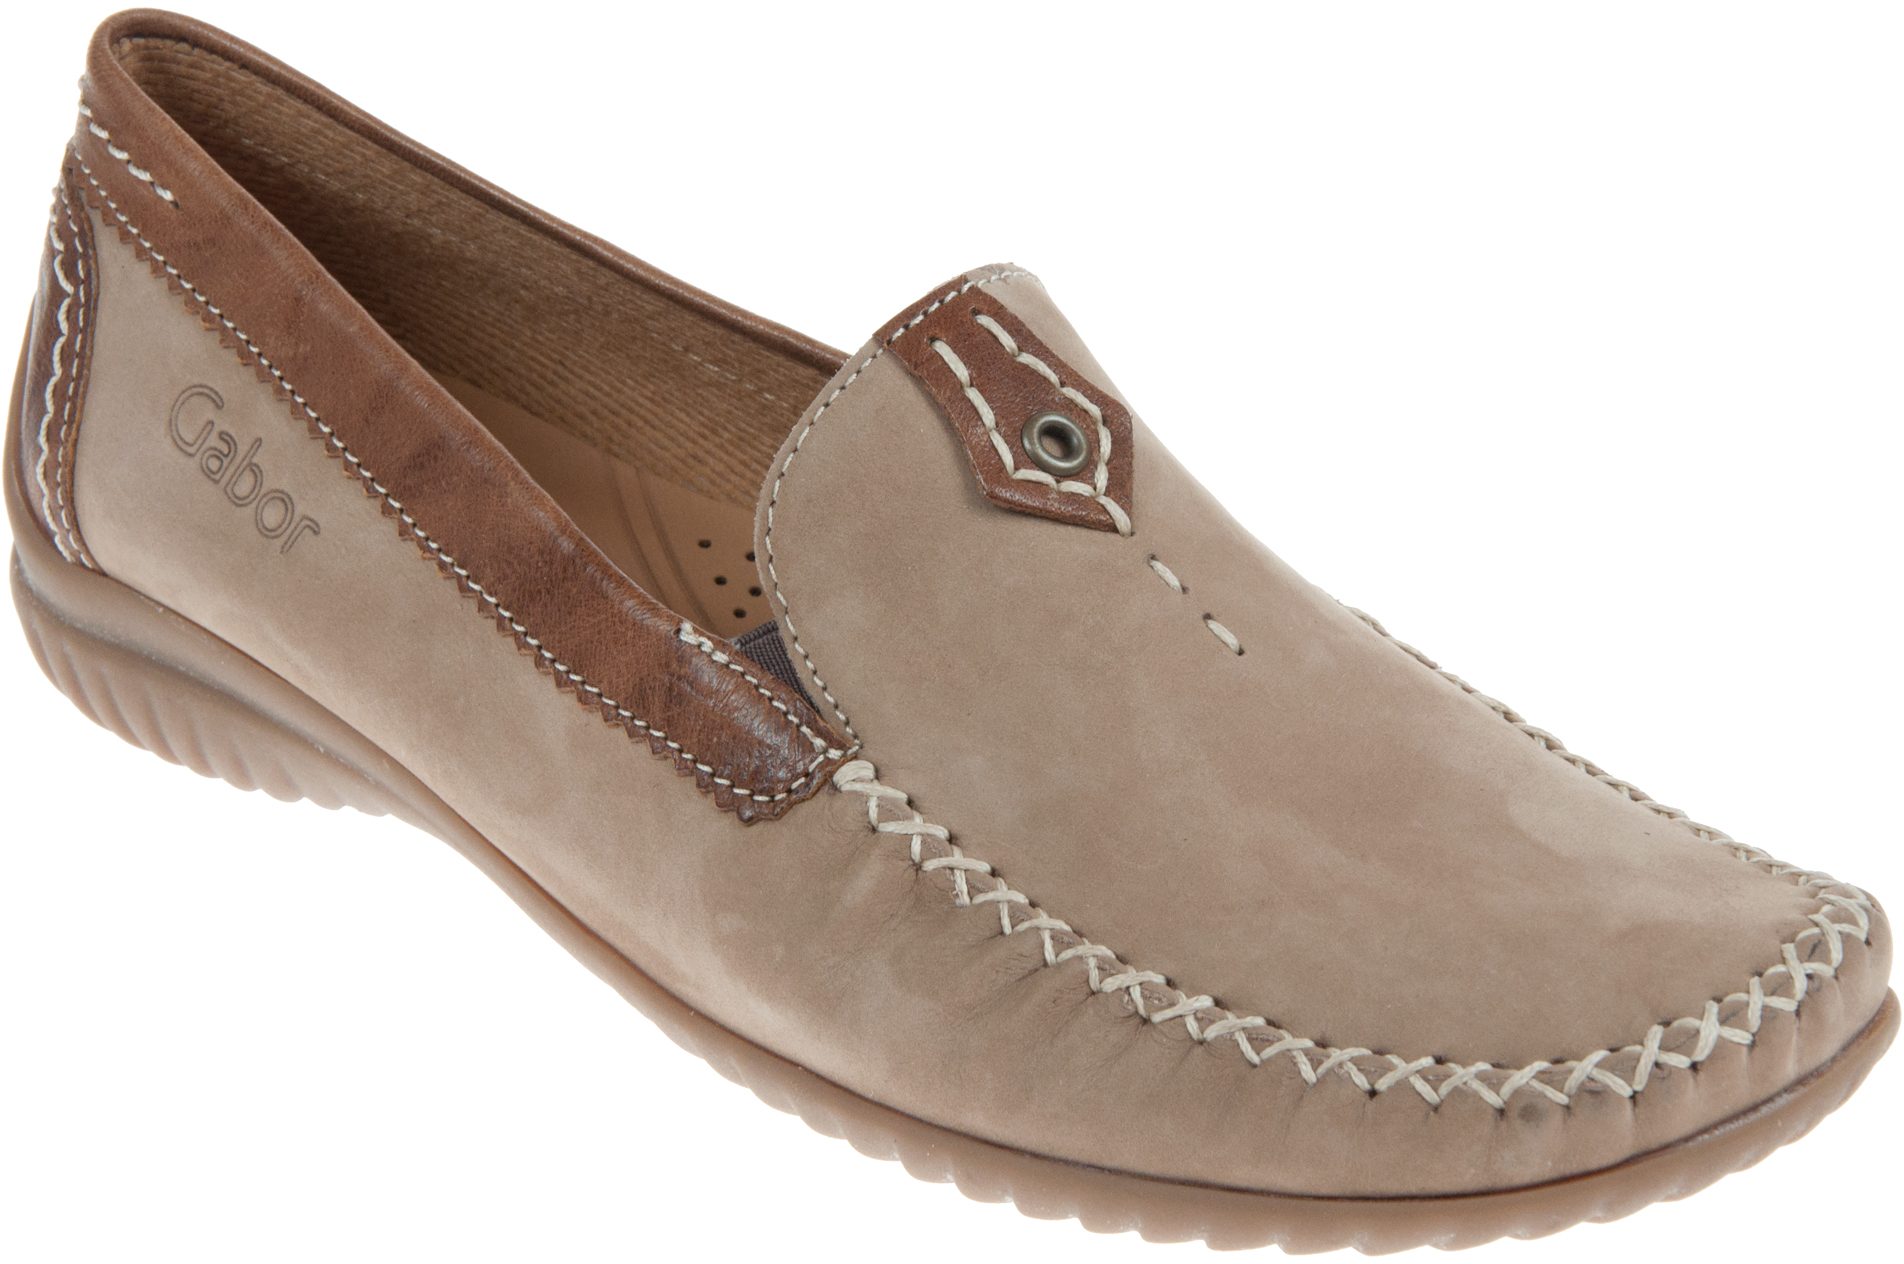 Gabor California Copper Nubuck 86.090.43 - Everyday Shoes - Humphries Shoes